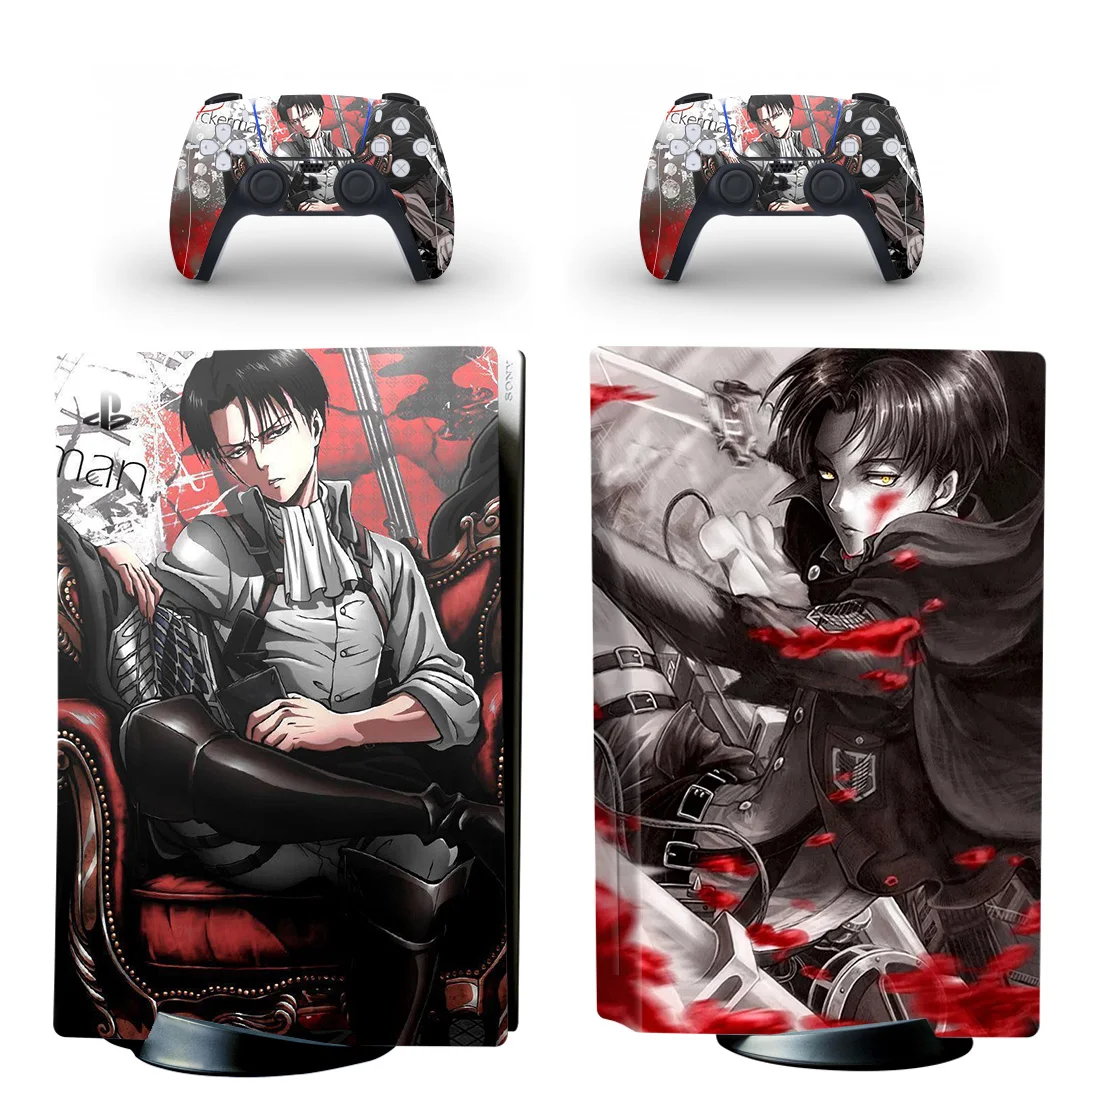 Attack On Titan PS5 Standard Disc Edition Skin Sticker Decal Cover for PlayStation 5 Console & Controller PS5 Skin Sticker Vinyl